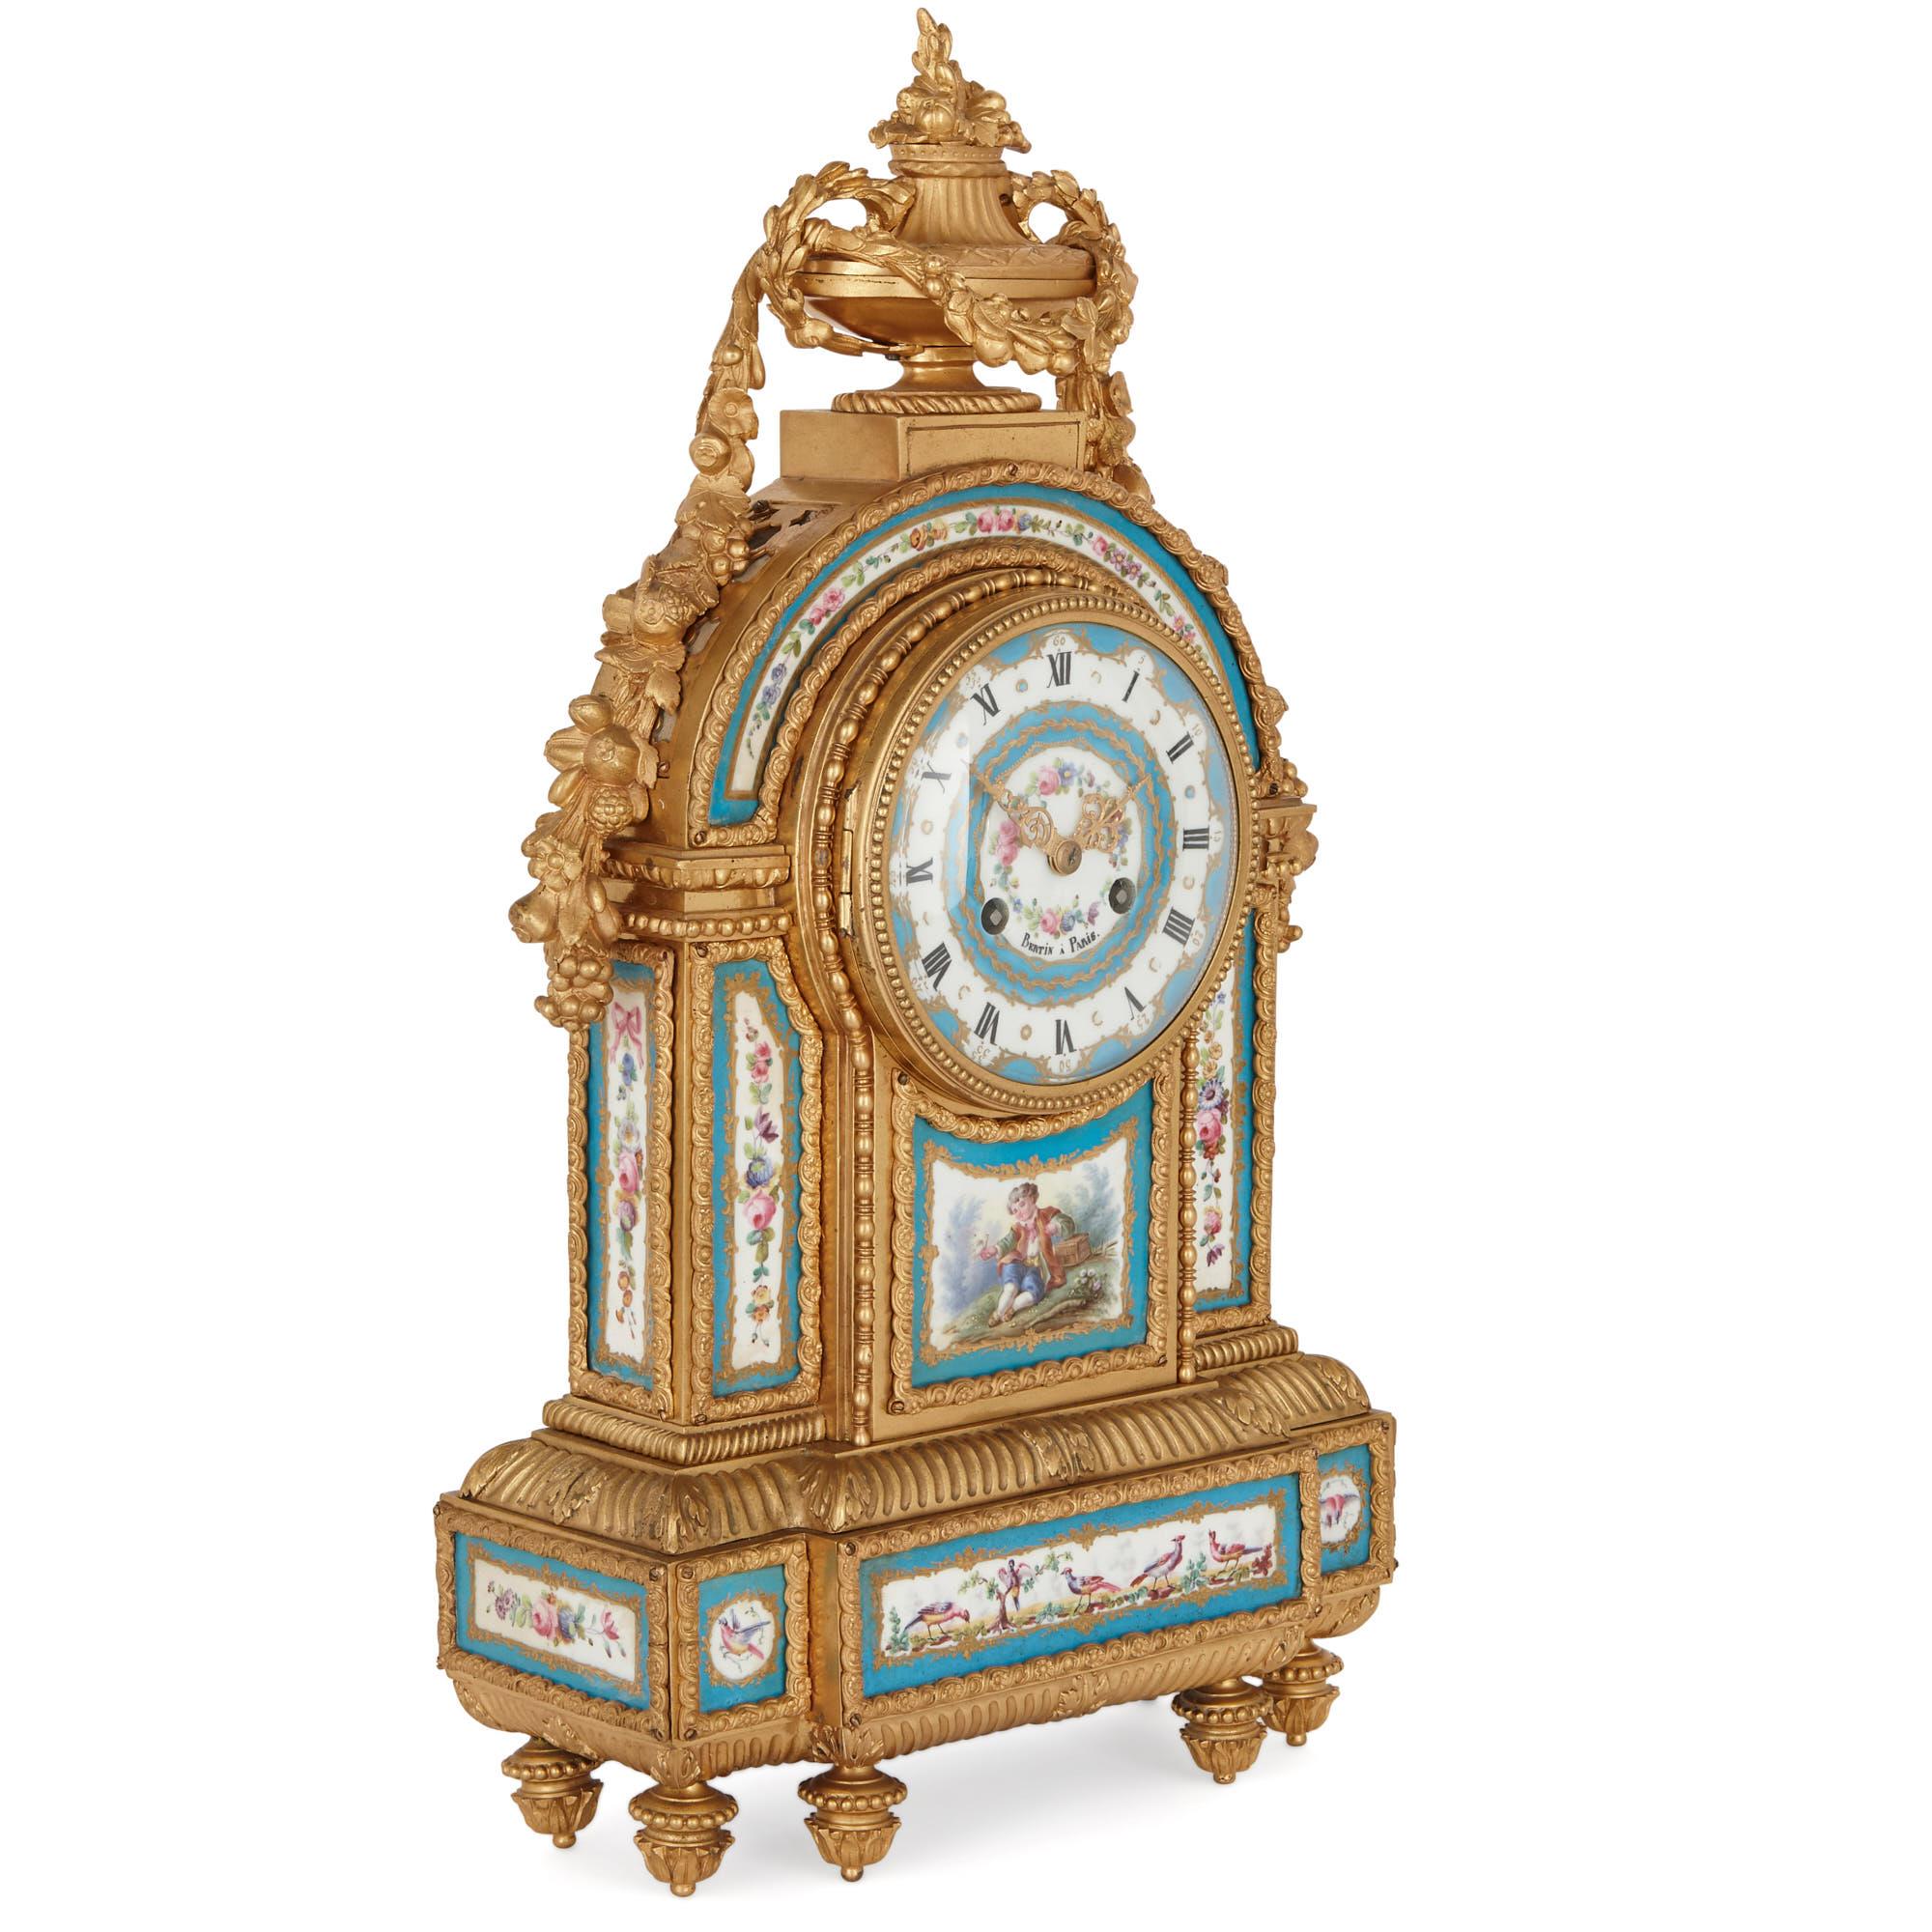 This beautiful mantel clock has been designed in an 18th century Rococo style, which was popularised by the Sèvres Porcelain Manufactory. The clock has been expertly cast in bronze and gilded, then set with intricately-painted porcelain plaques.